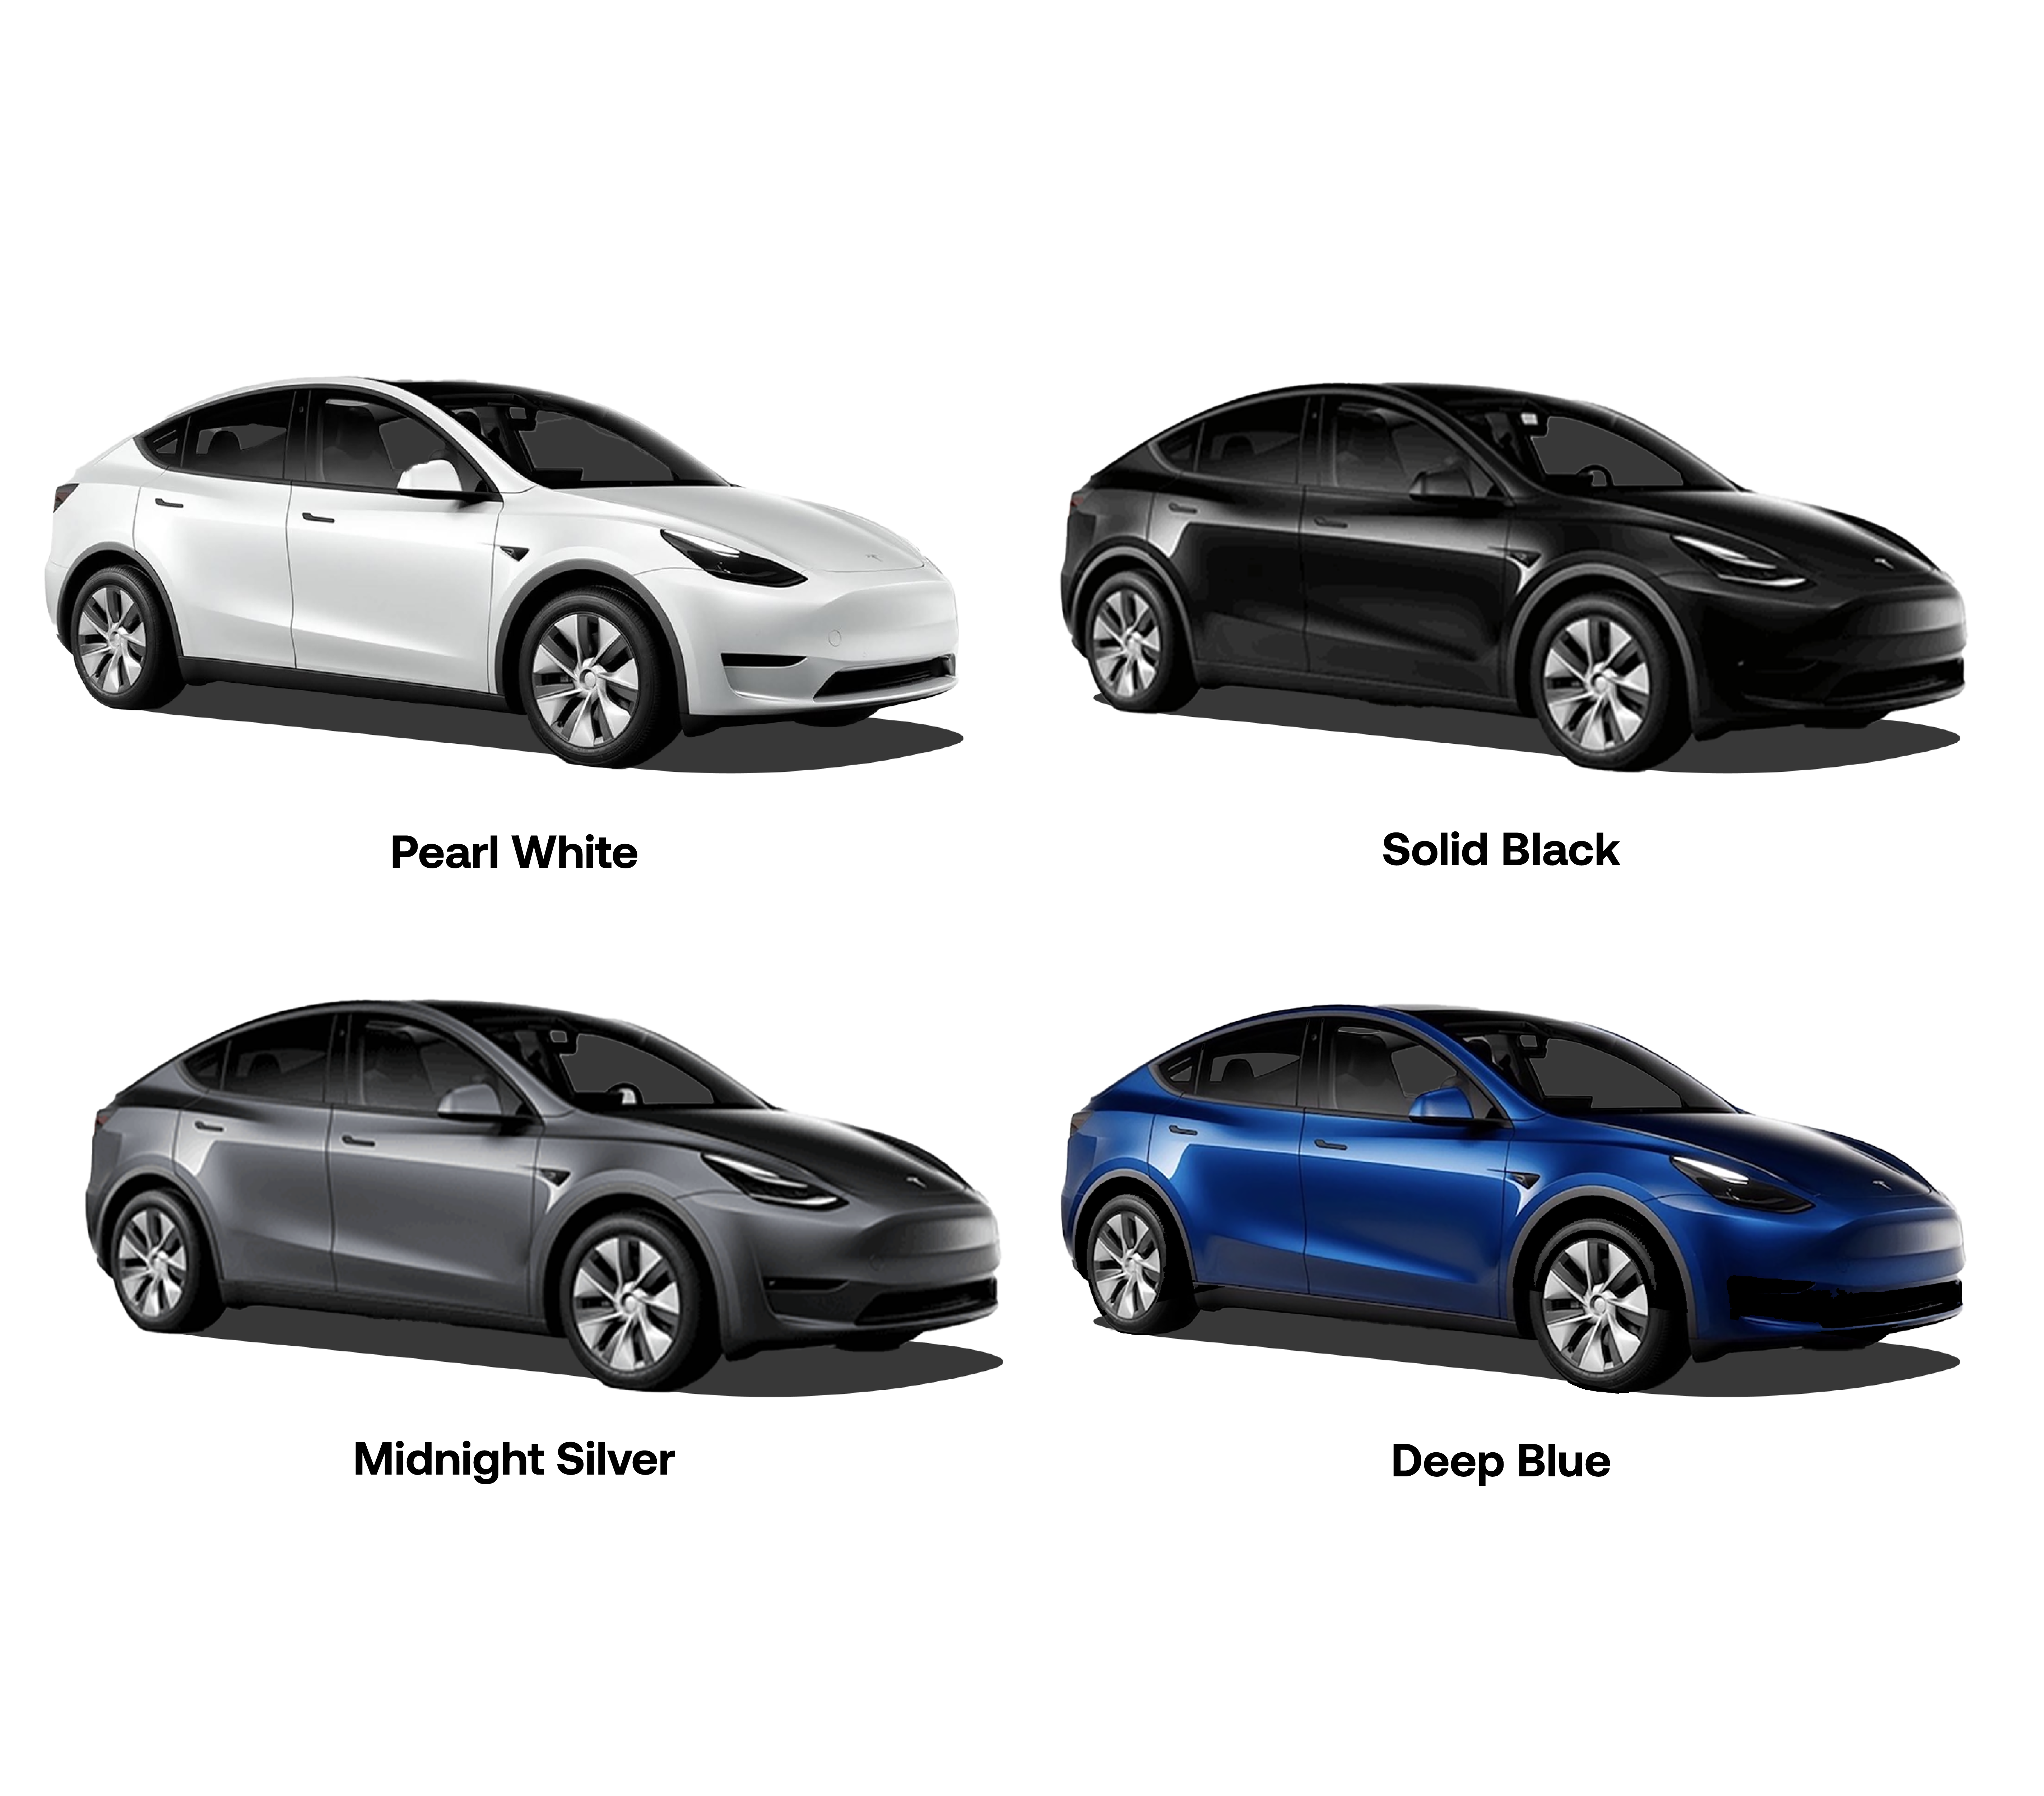 Tesla Model Y gets two new colors and new range ratings